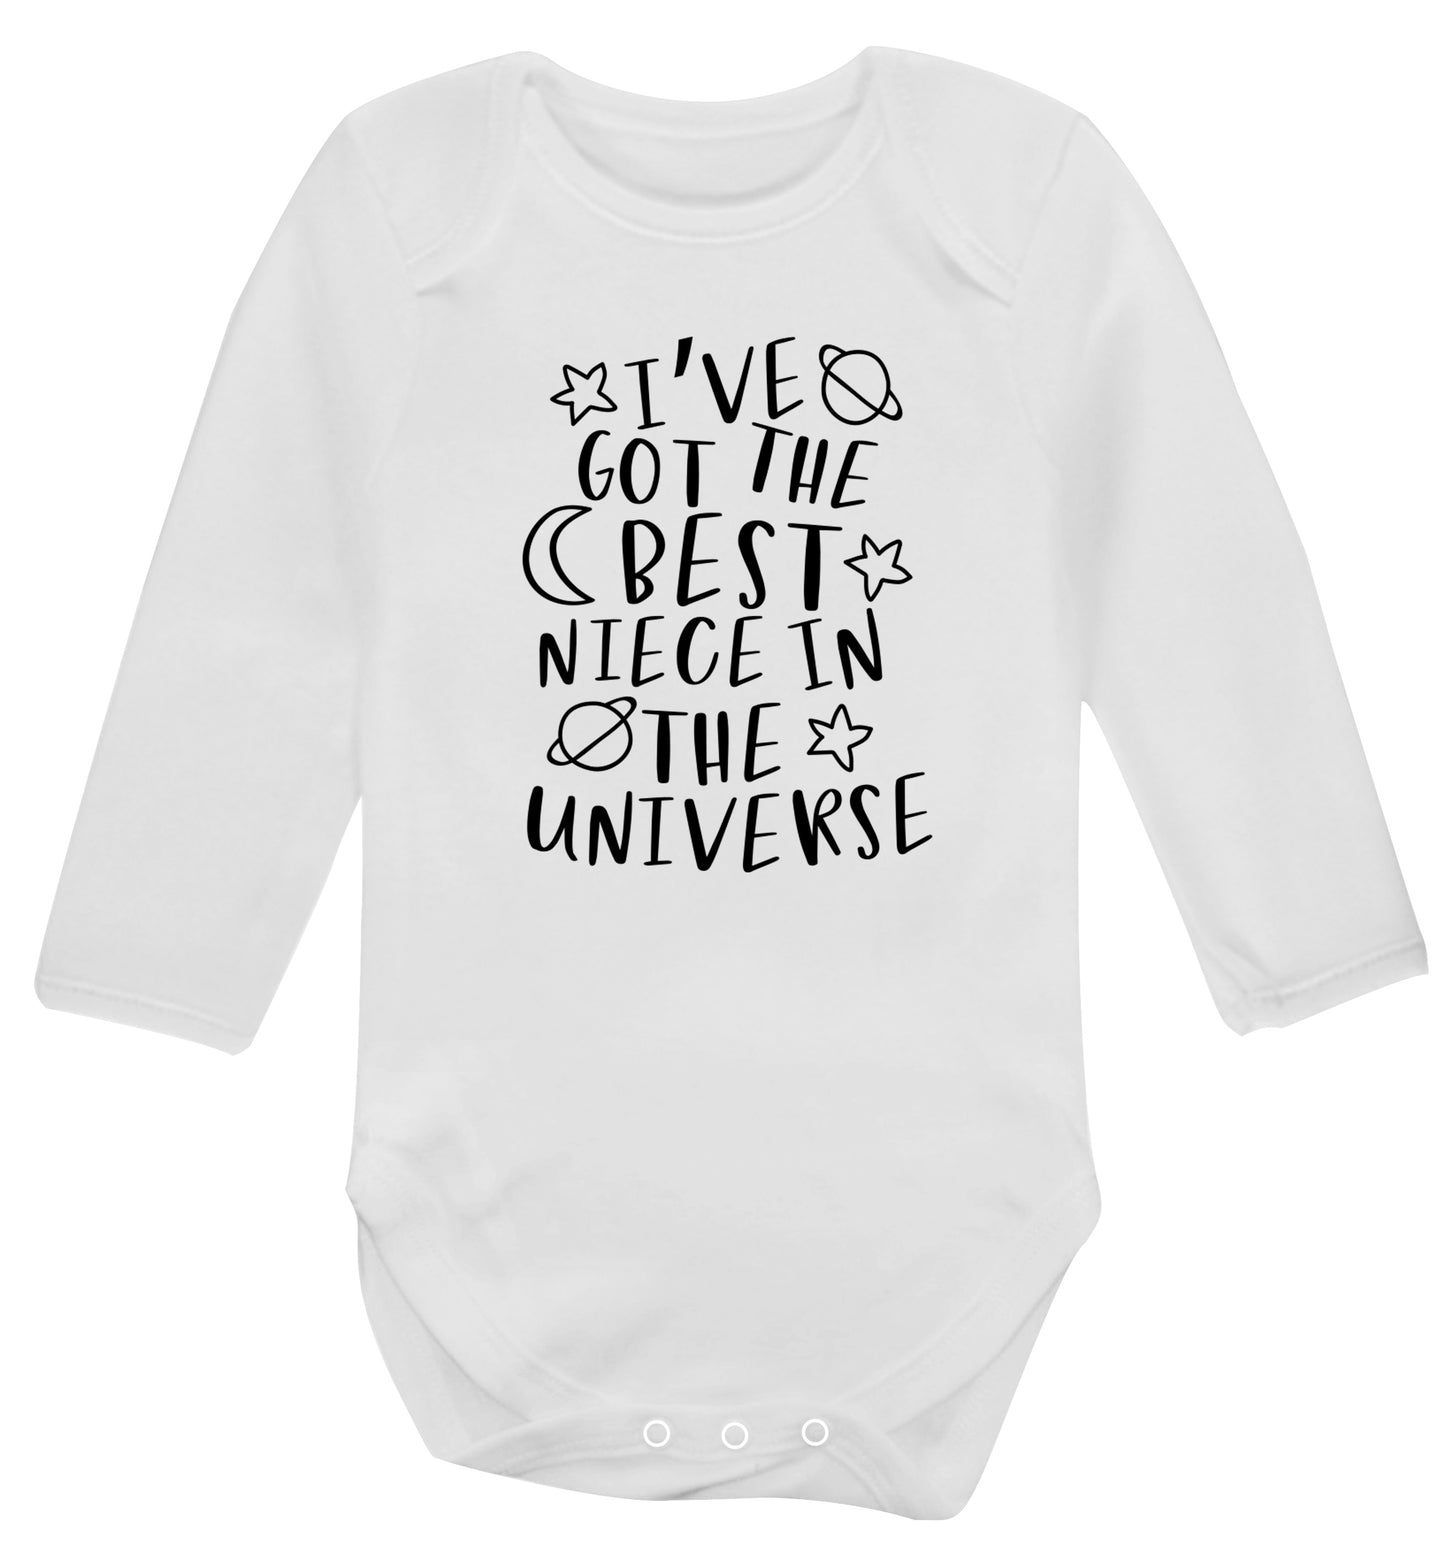 I've got the best niece in the universe Baby Vest long sleeved white 6-12 months